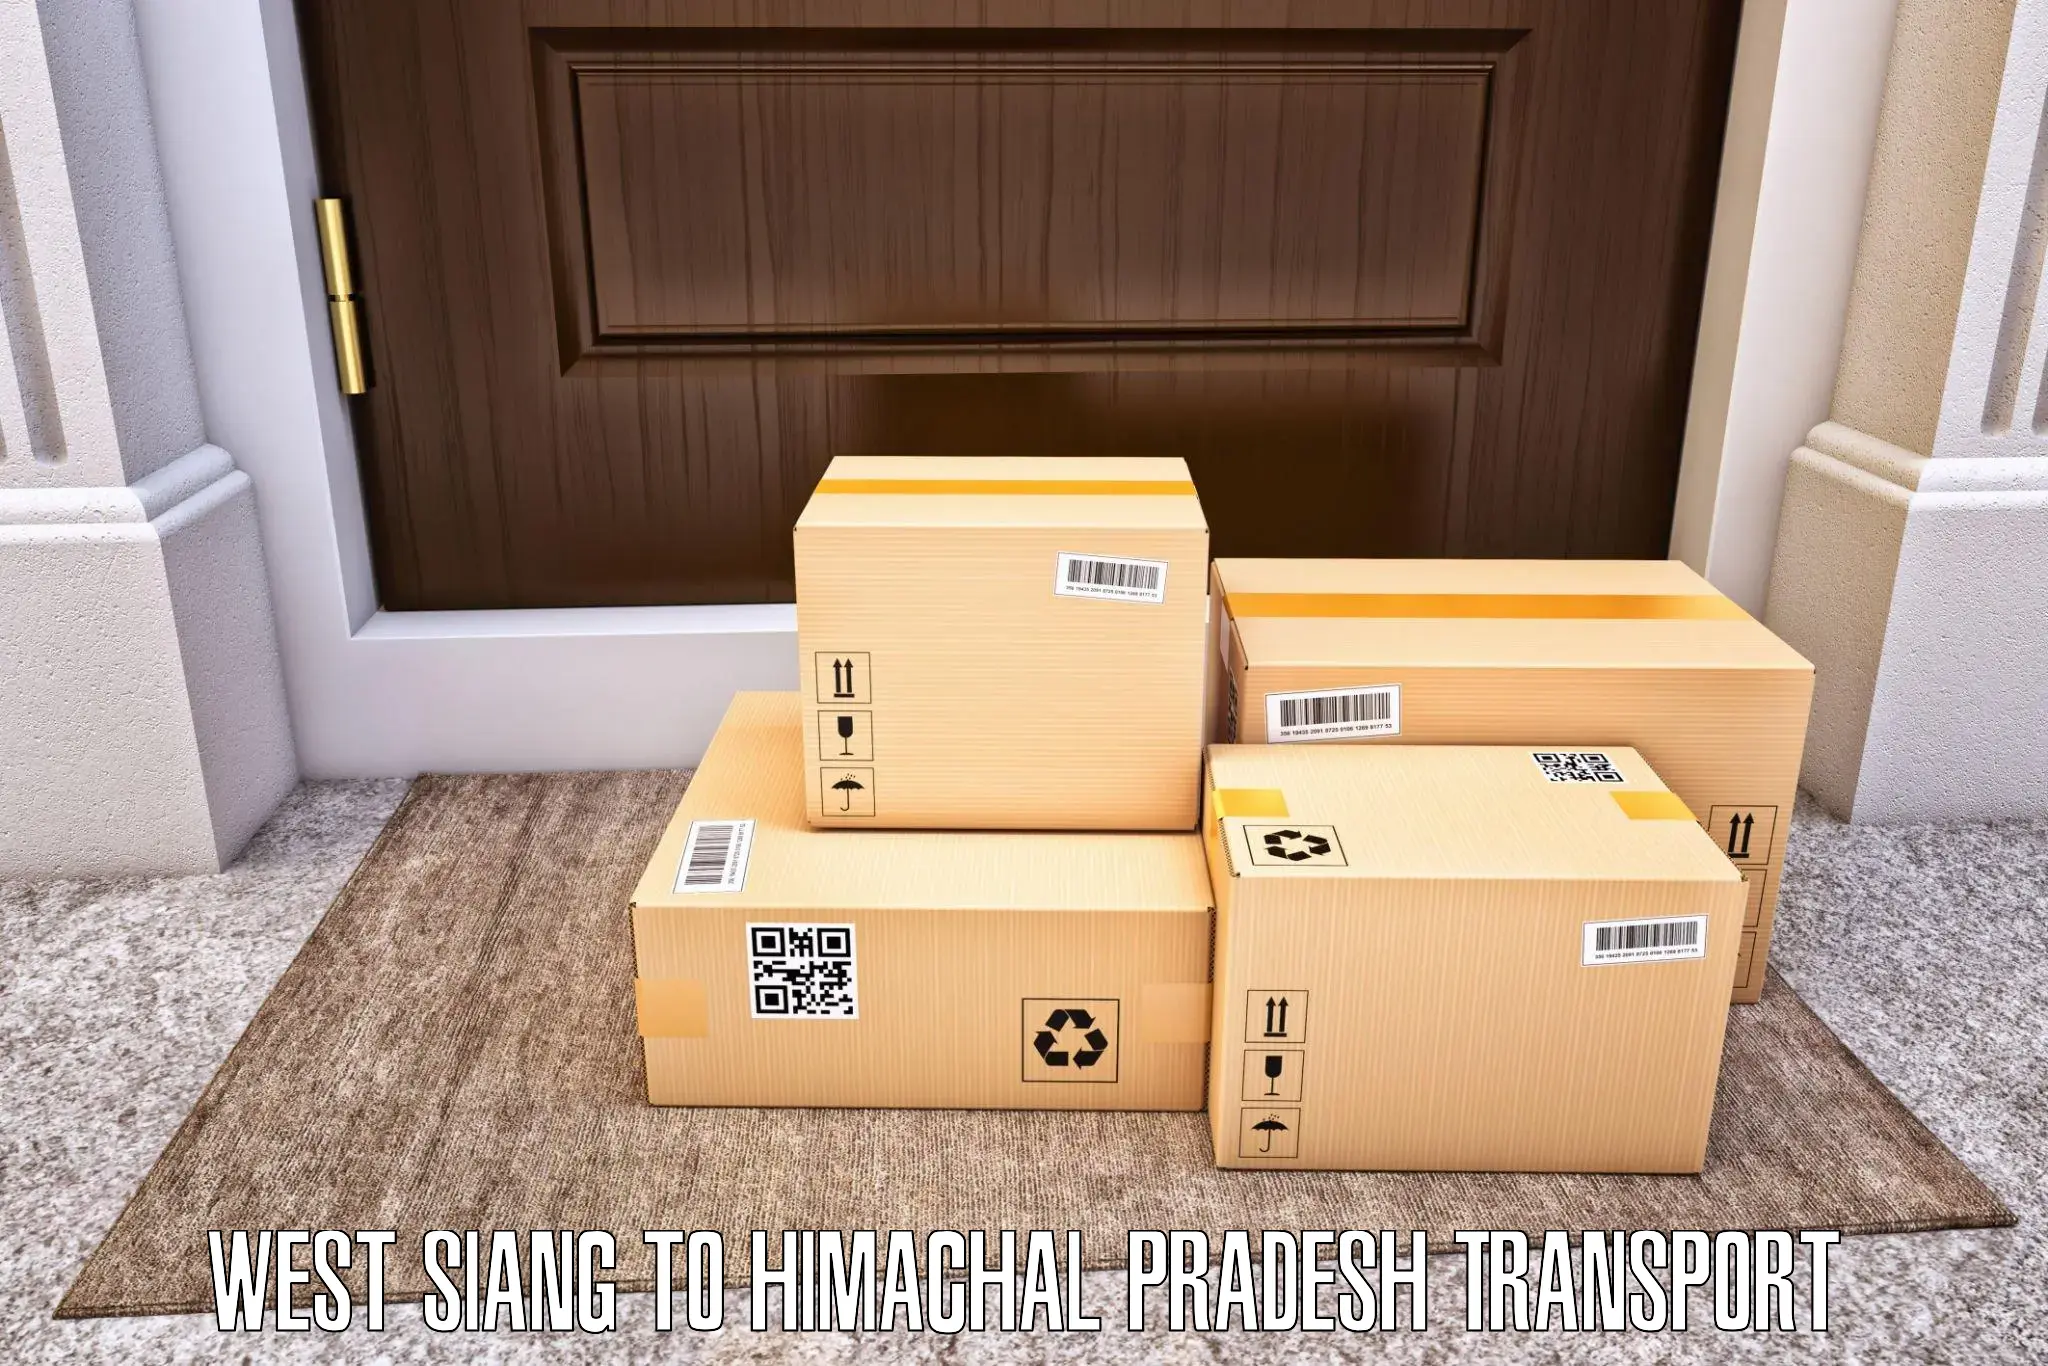 Logistics transportation services West Siang to Chachyot